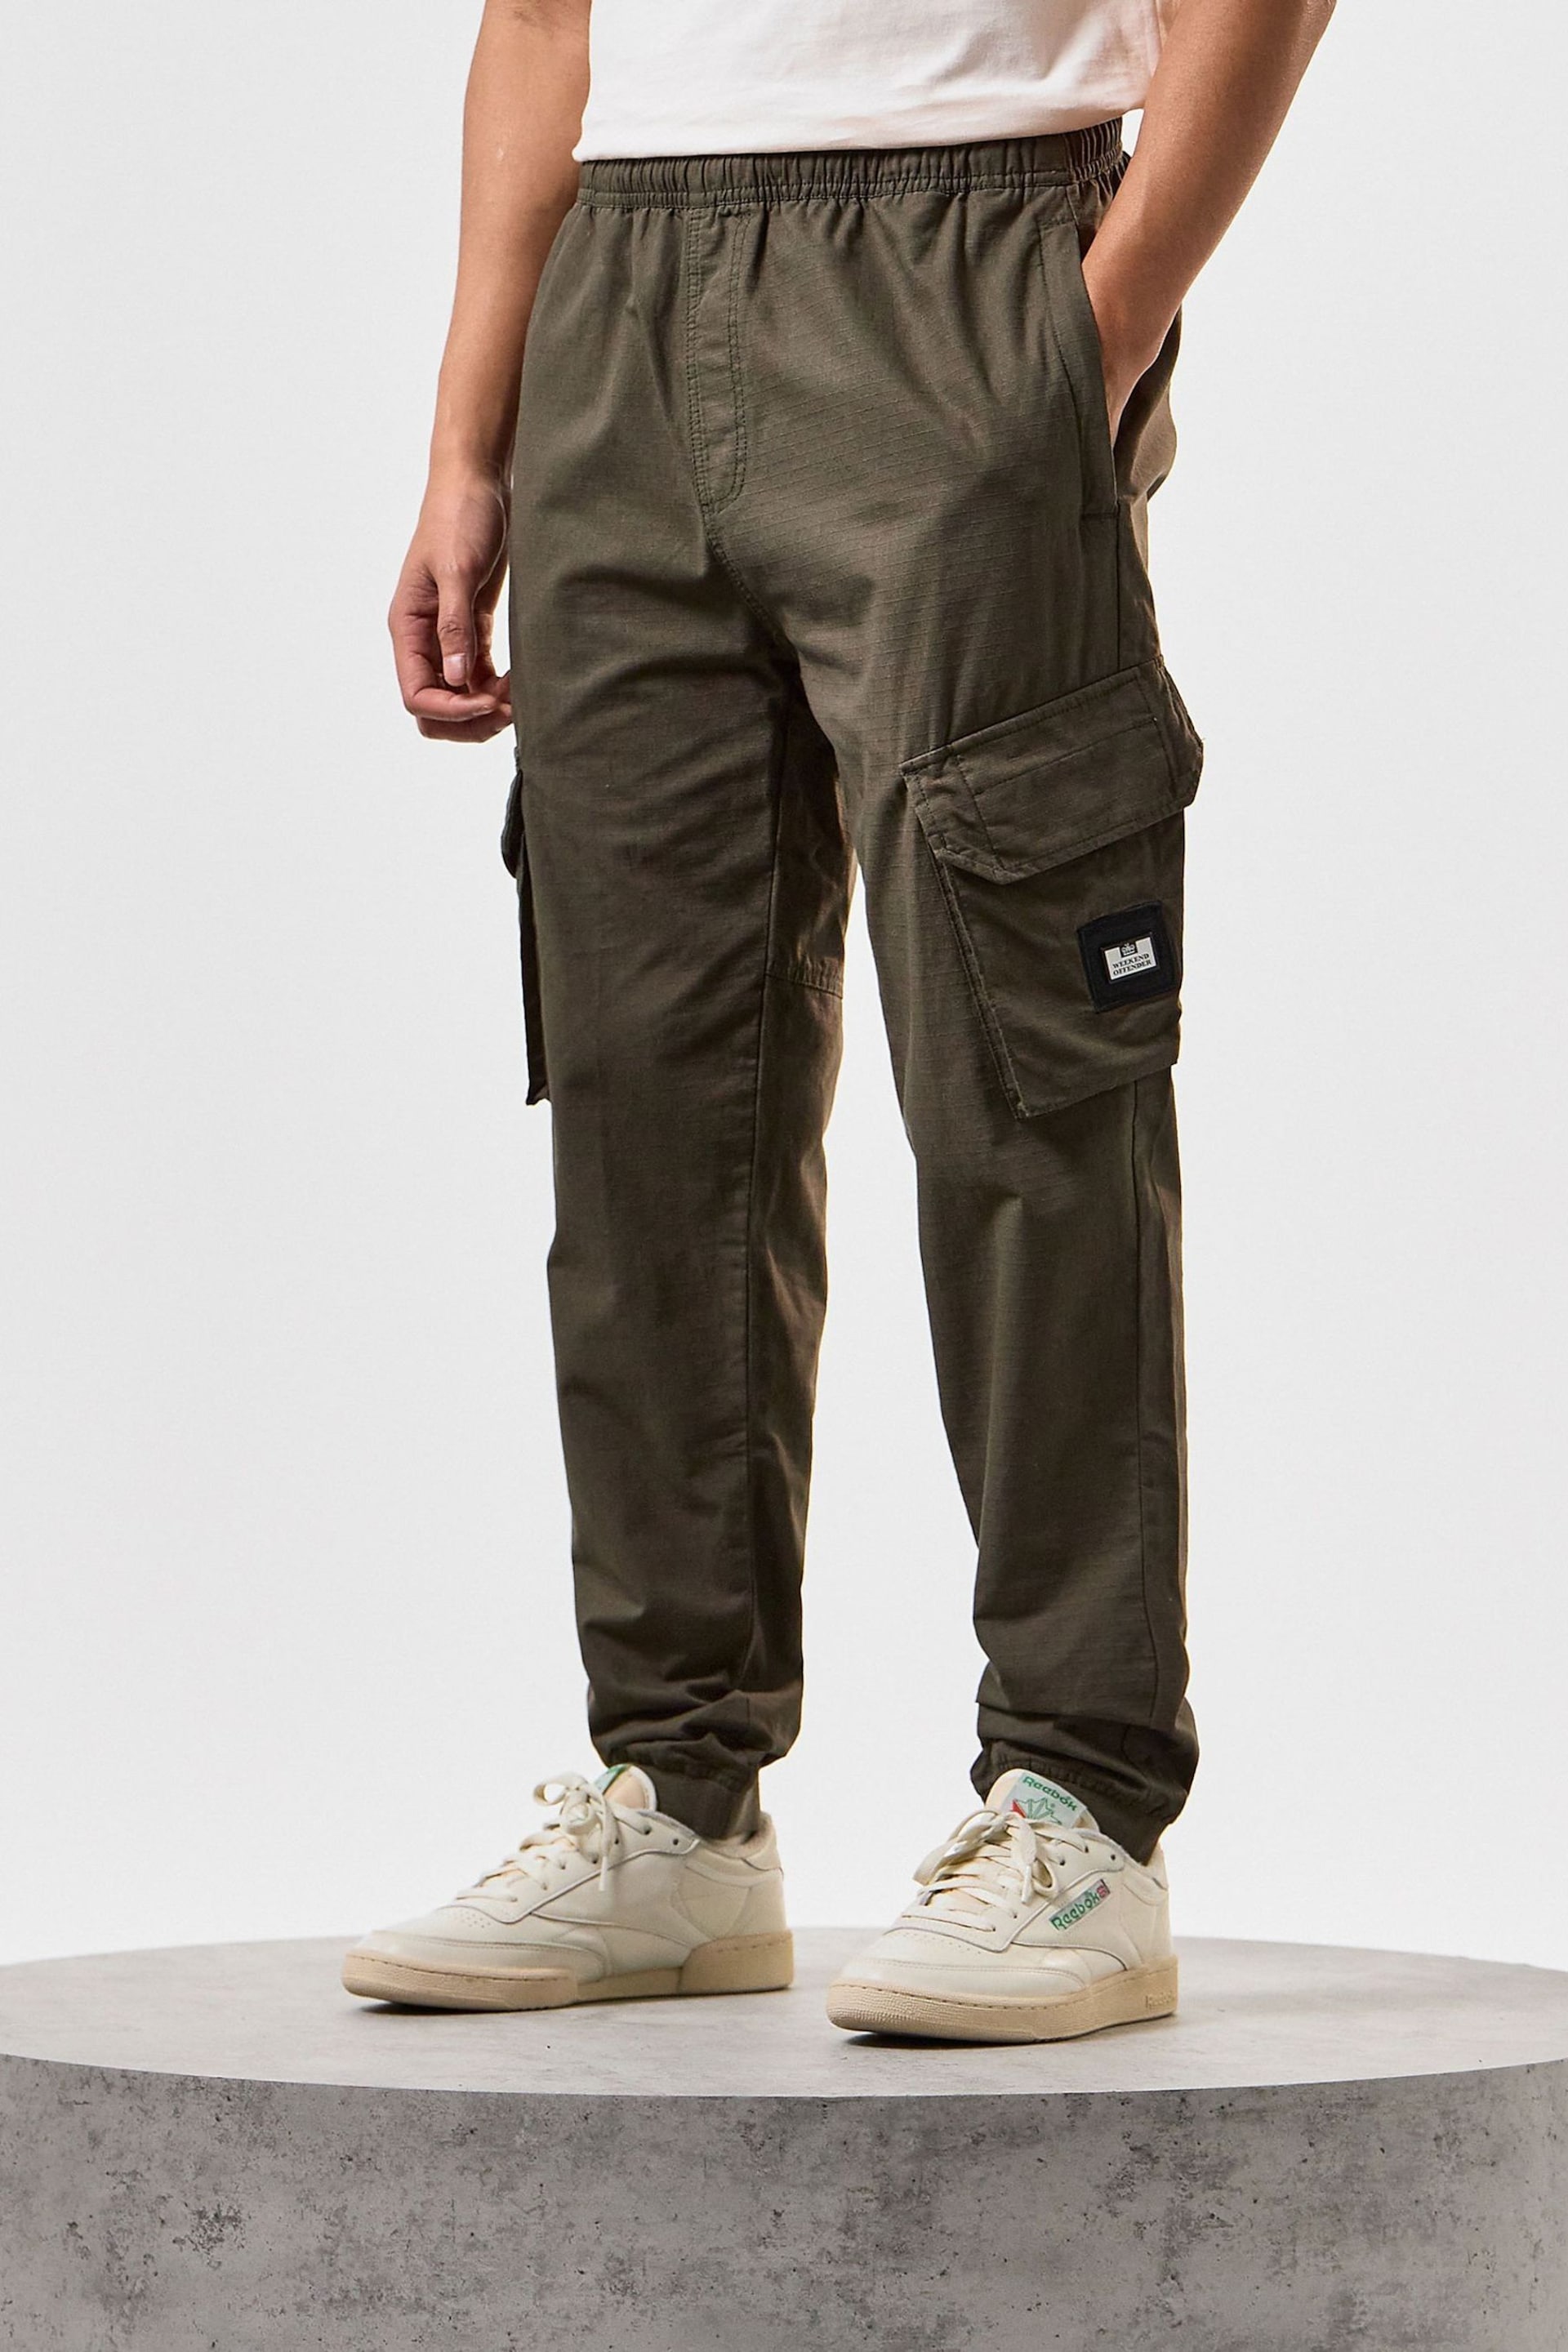 Weekend Offender Pianamo Cargo Trousers - Image 1 of 6